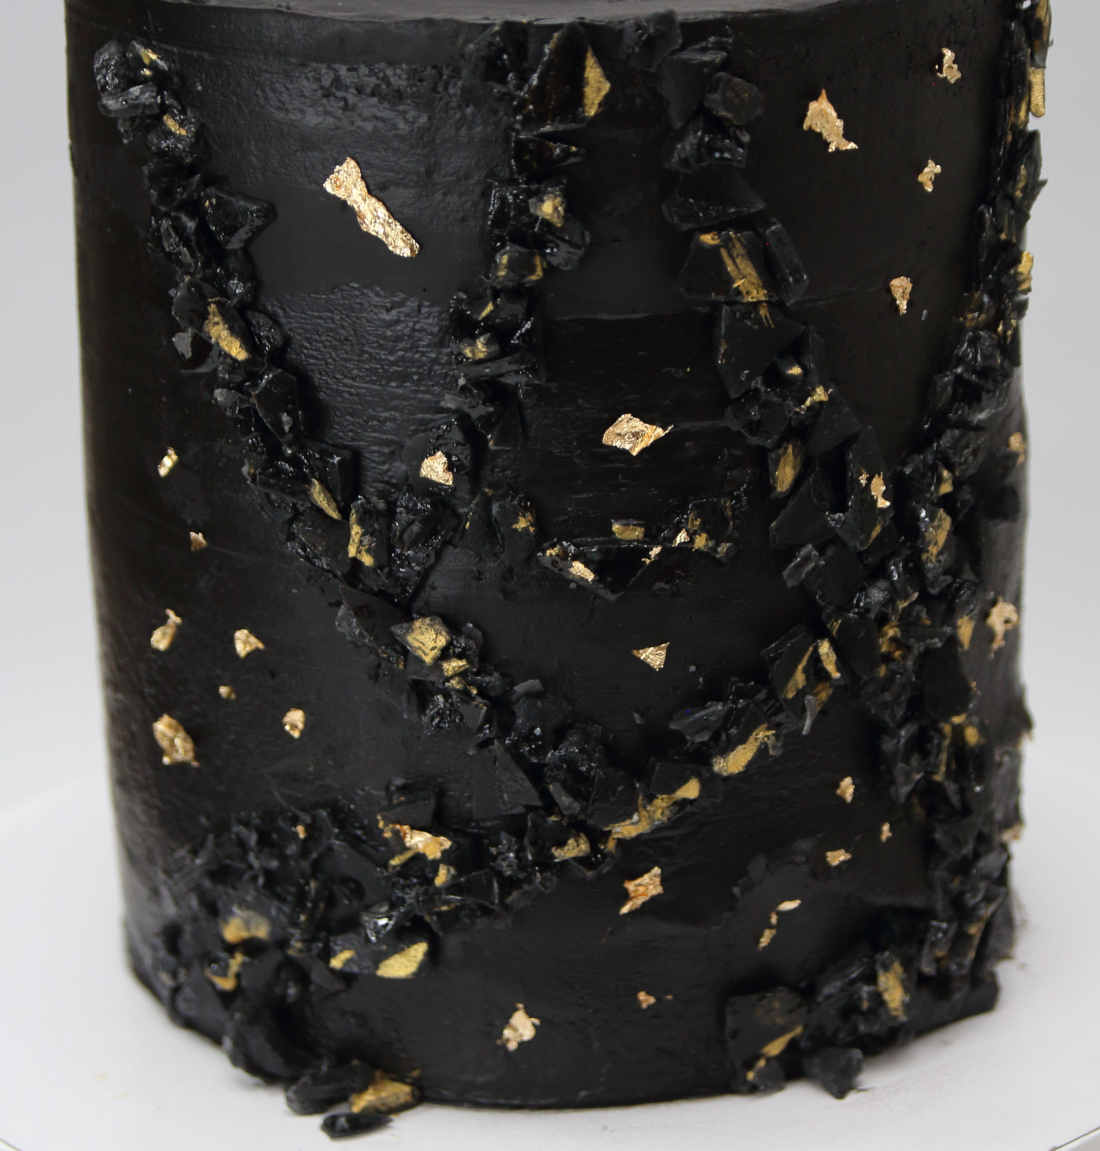 Gold particles on a black birthday cake